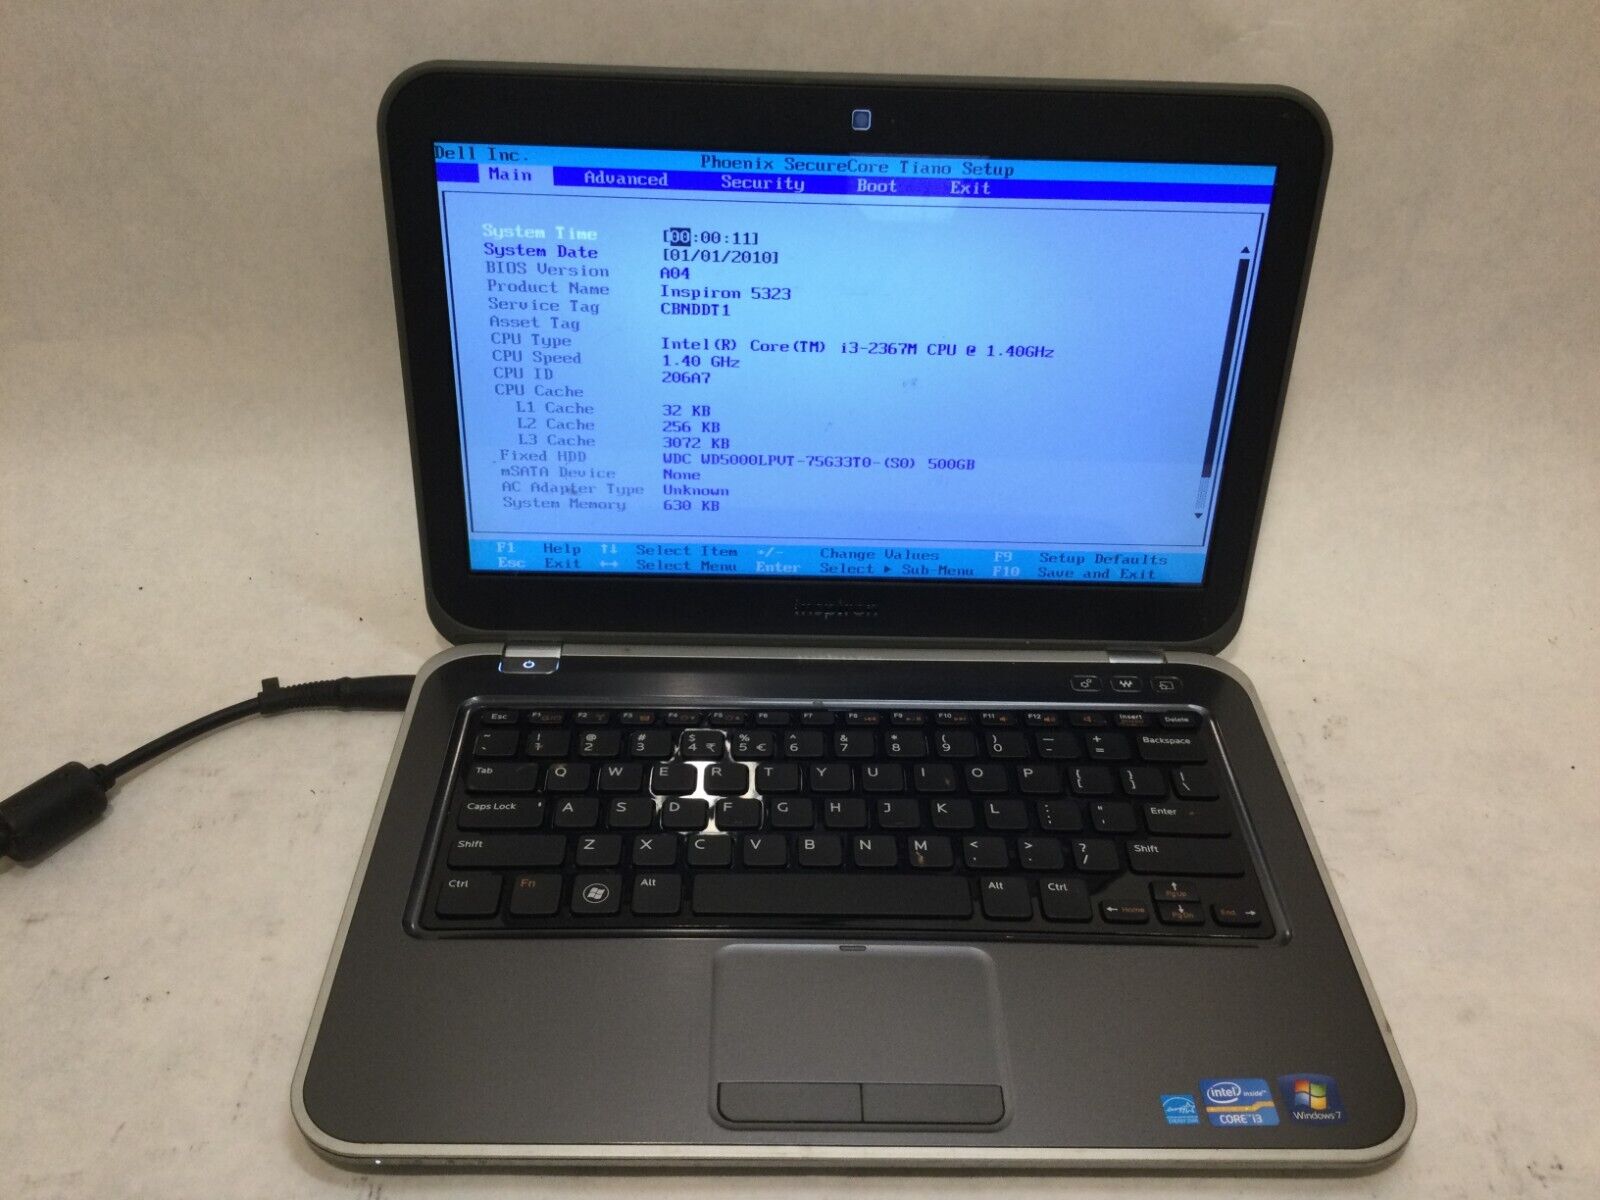 Dell Inspiron 13z-5323 13.1” / Intel Core i3-2367M @ 1.40GHz / (MISSING PARTS)MR